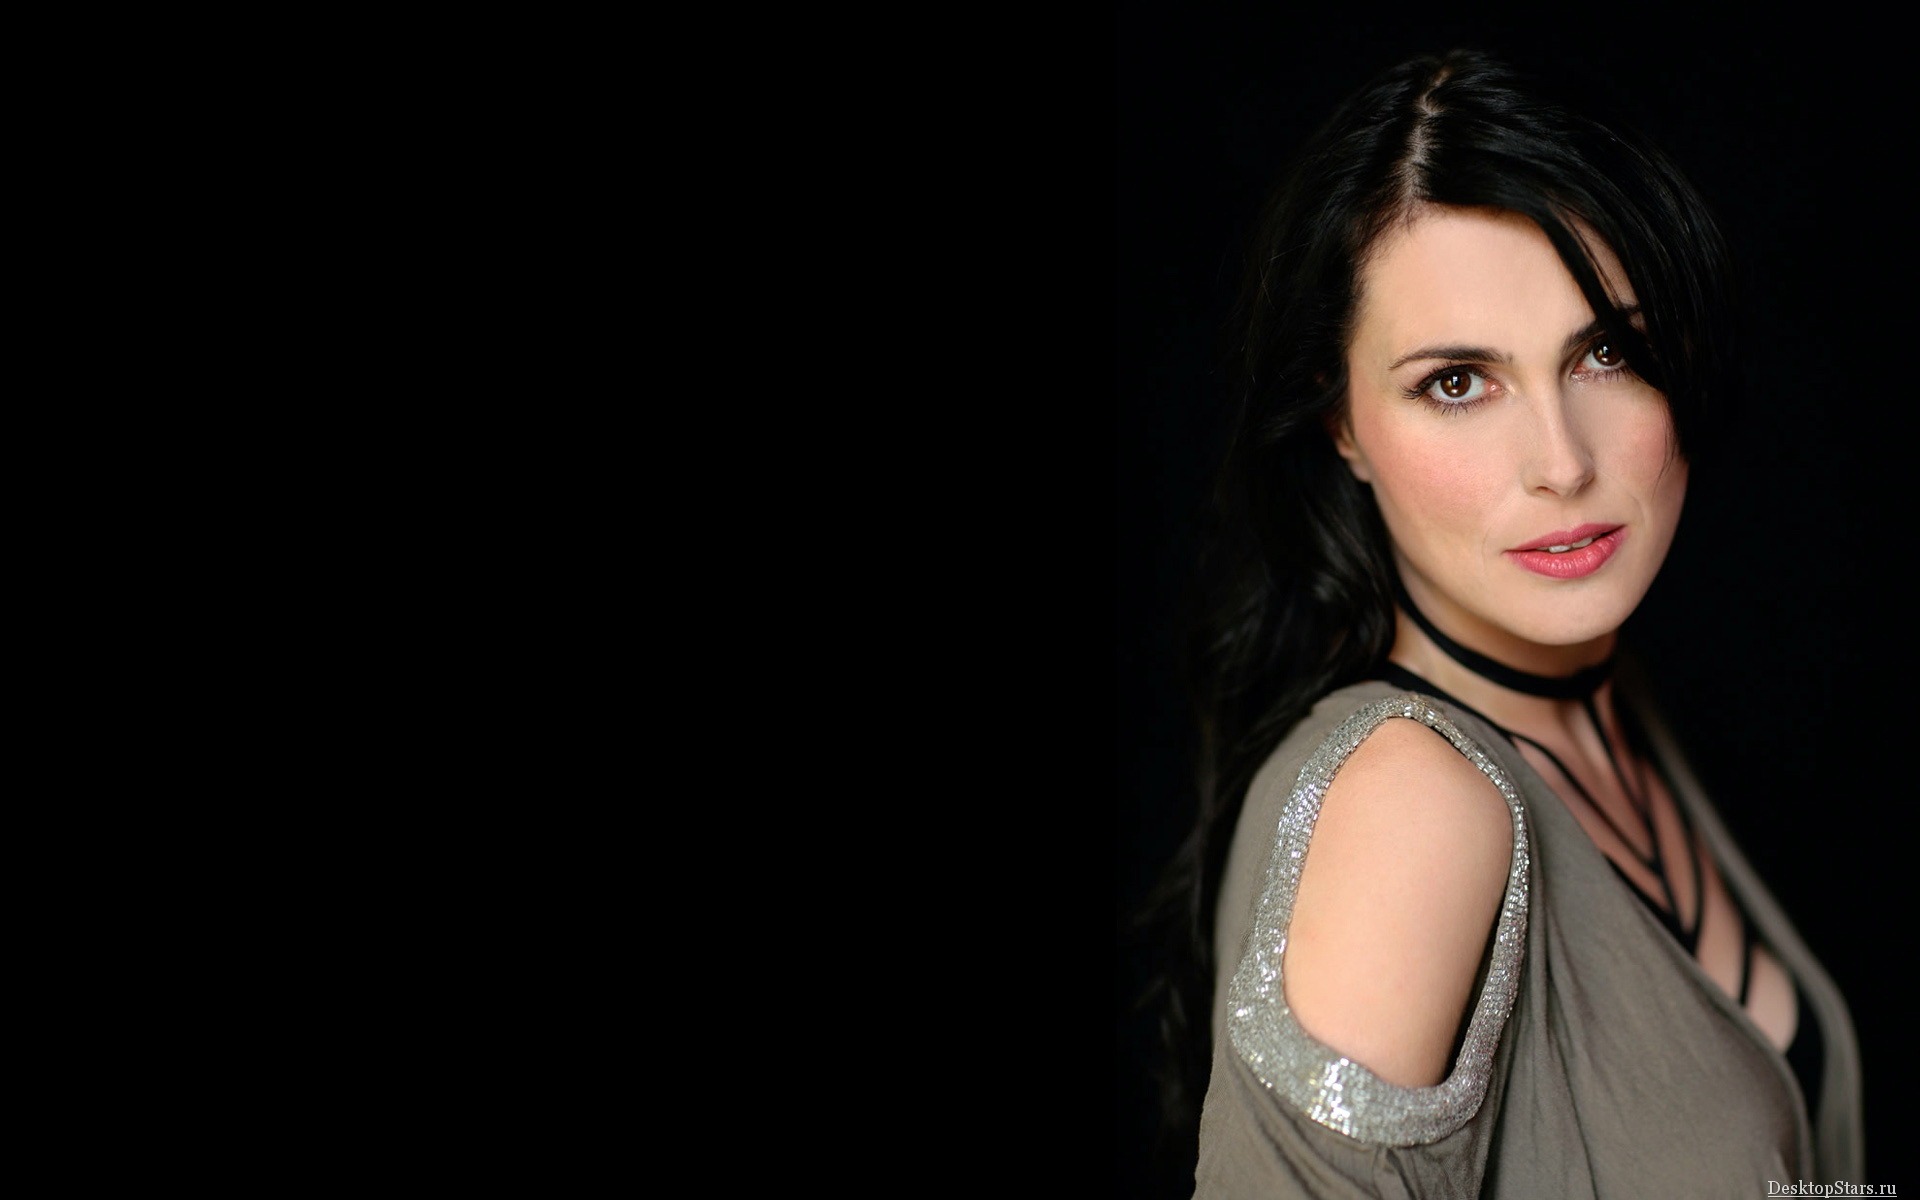 Sharon den Adel #004 - 1920x1200 Wallpapers Pictures Photos Images